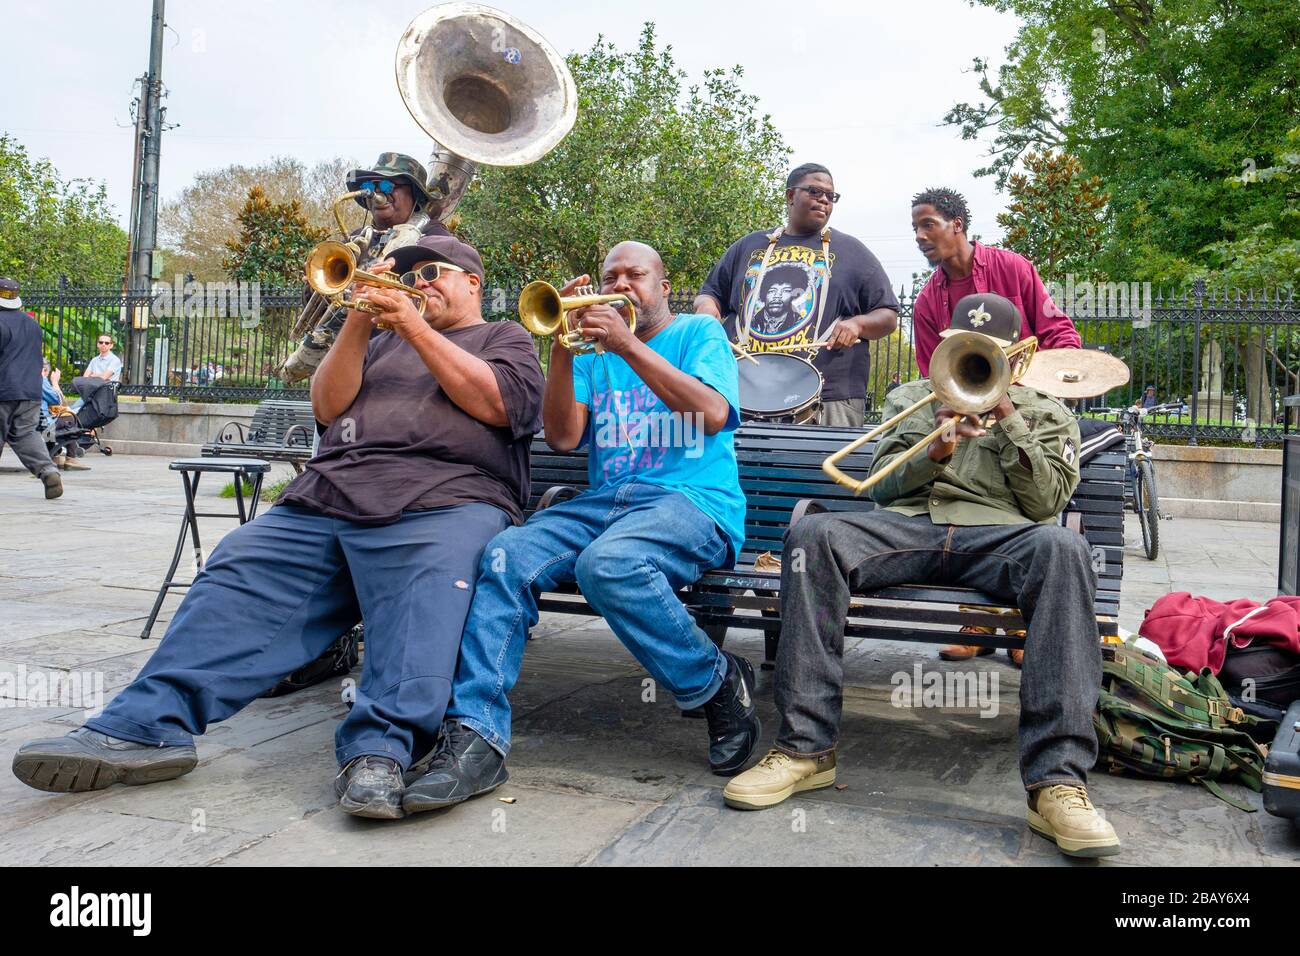 Street brass band singing, musicians playing jazz music on Jackson Square, New Orleans French Quarter New Orleans, Louisiana, USA. Stock Photo